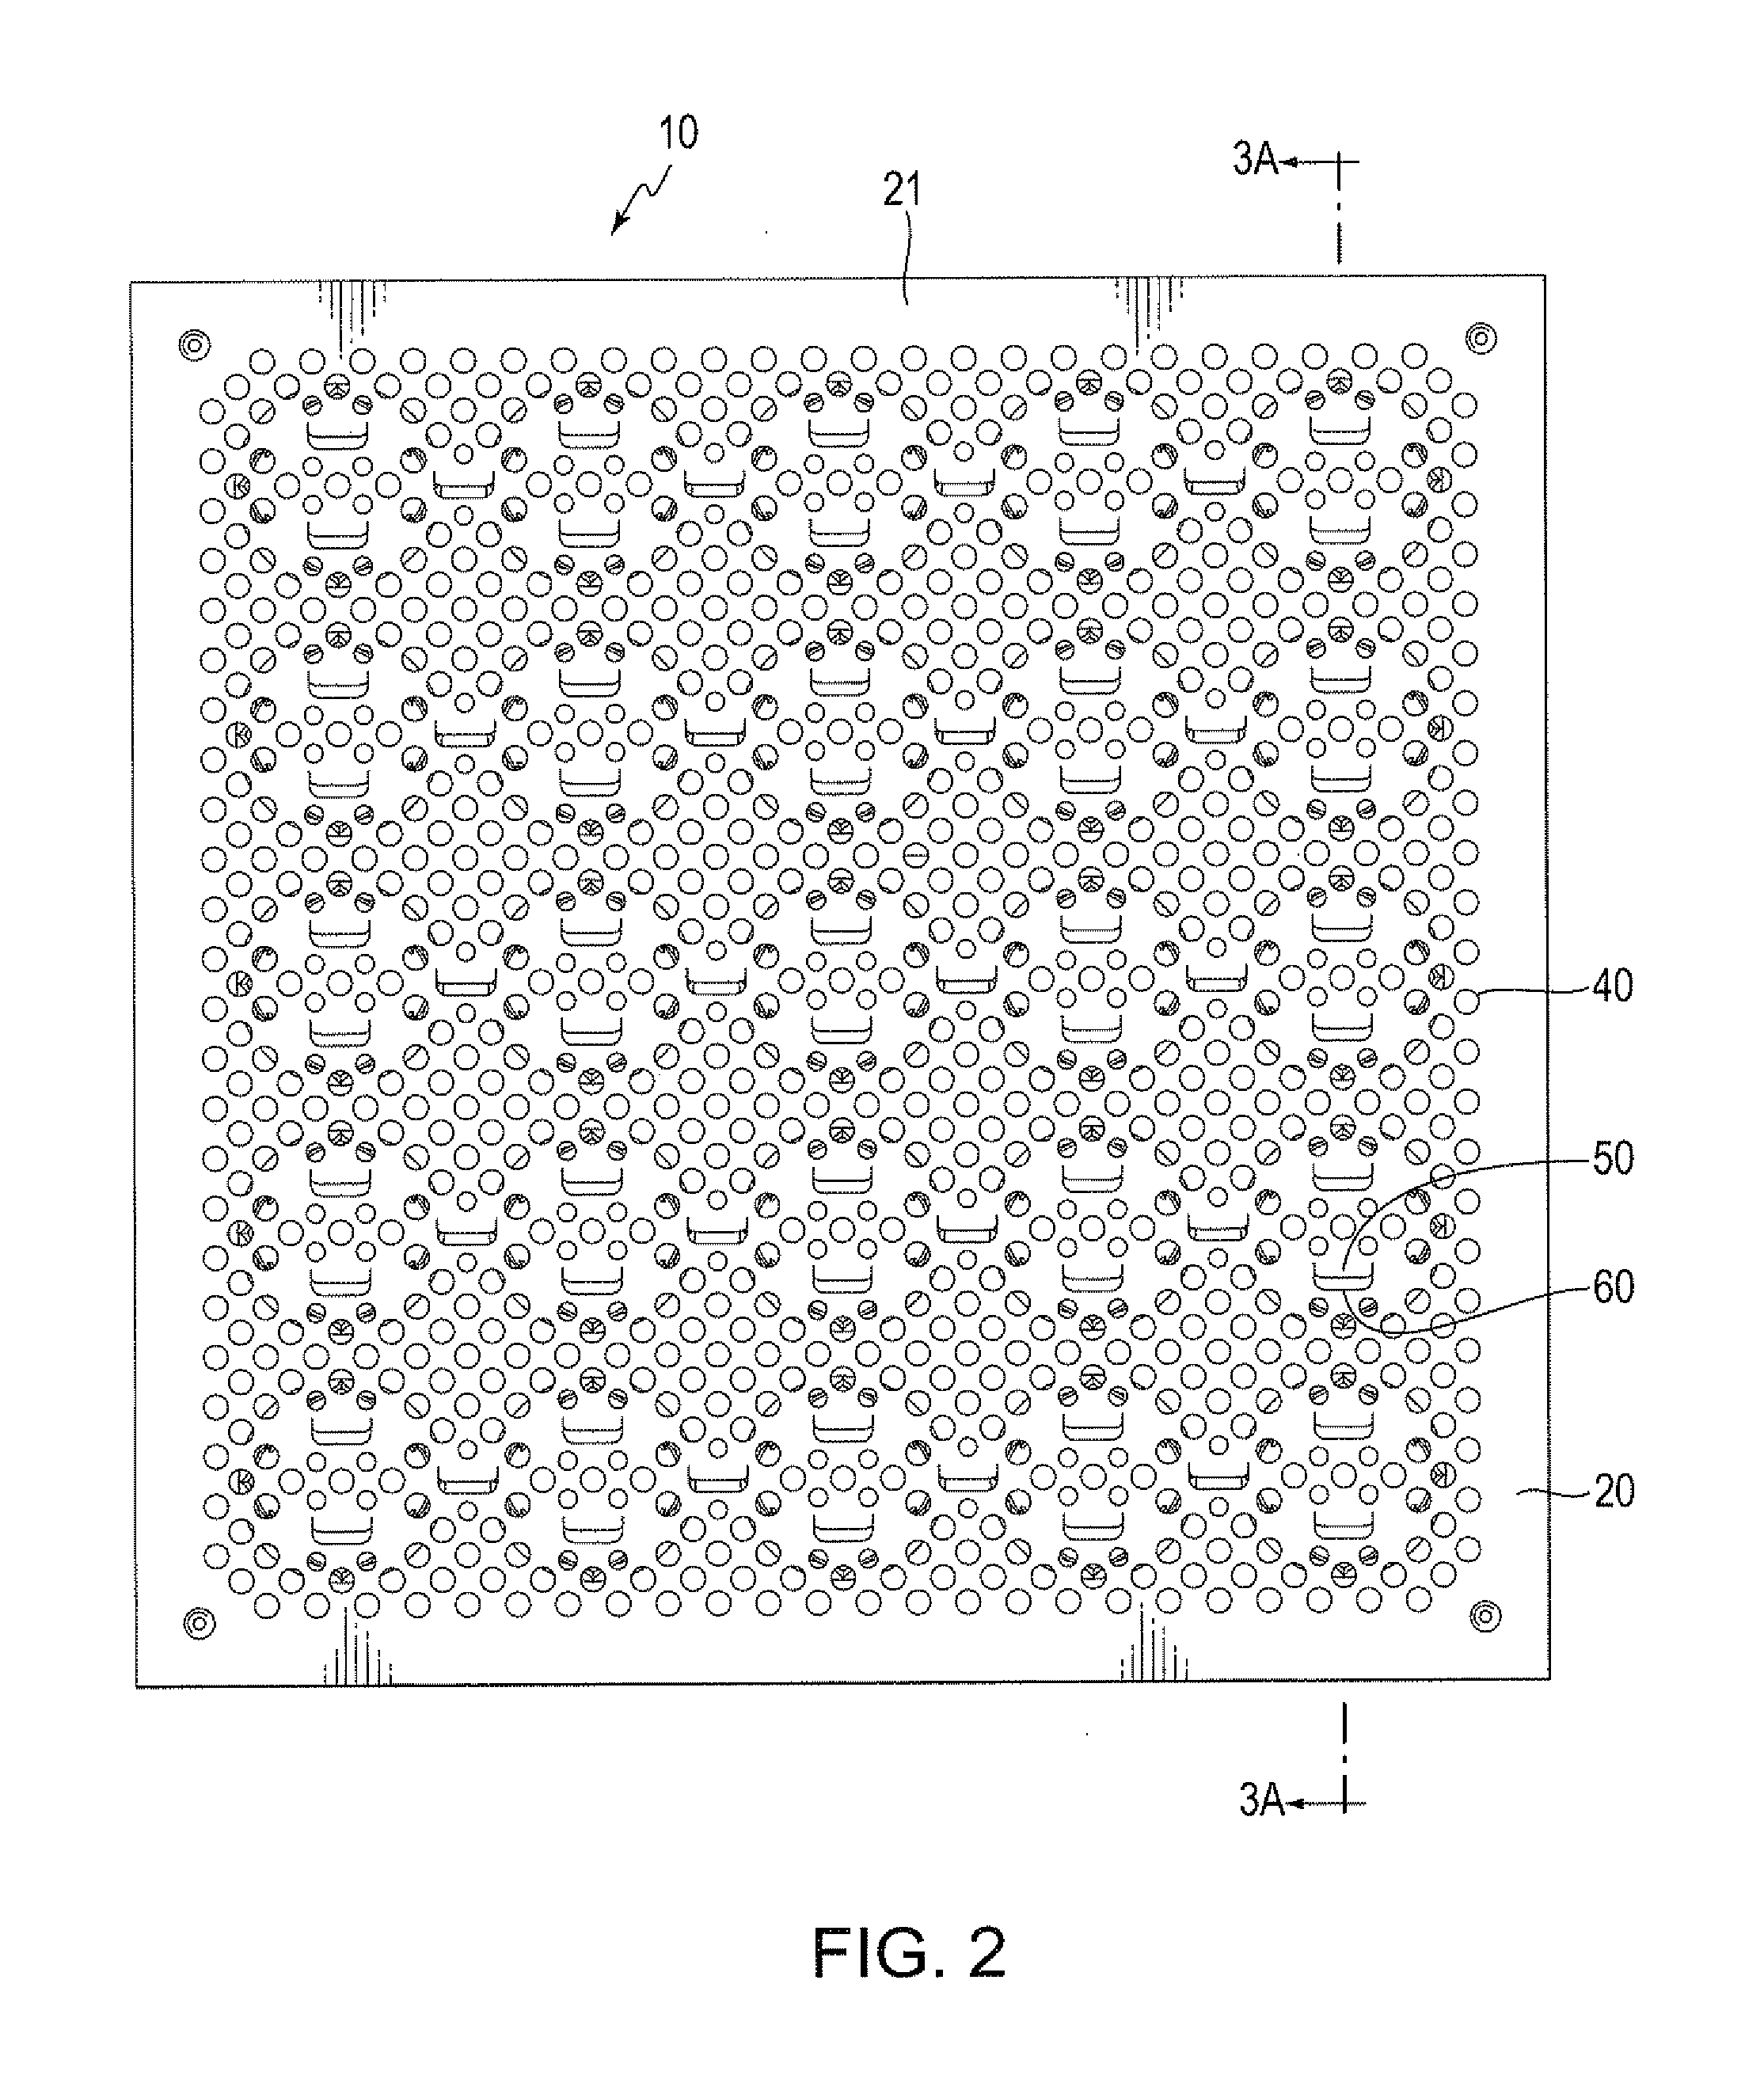 Access floor panel having intermingled directional and non-directional air passageways